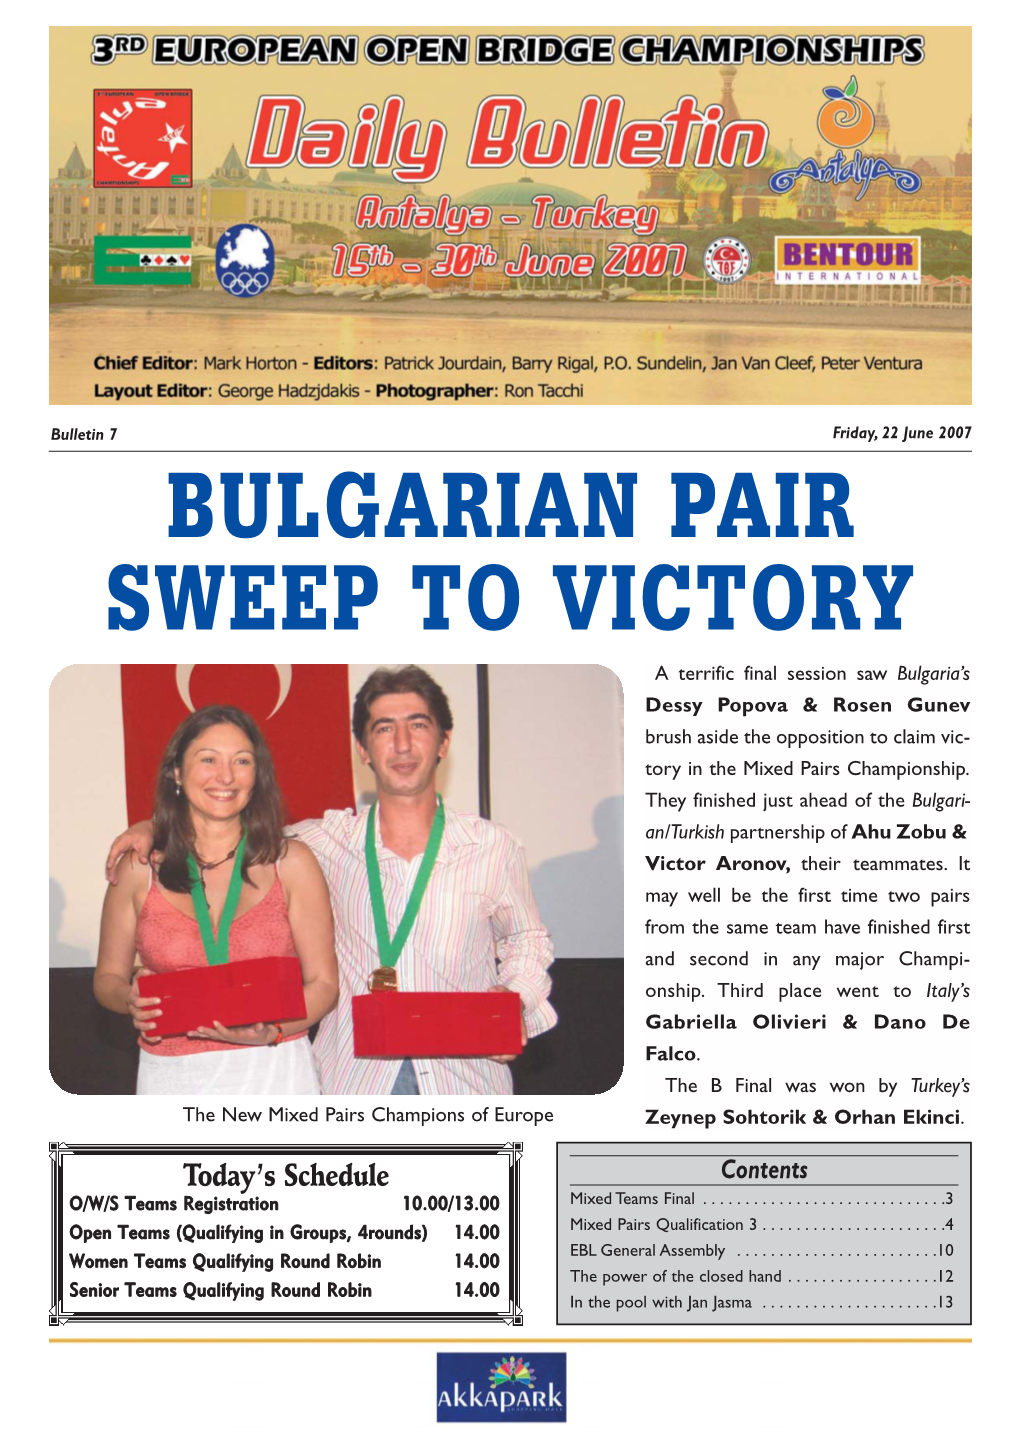 Bulgarian Pair Sweep to Victory